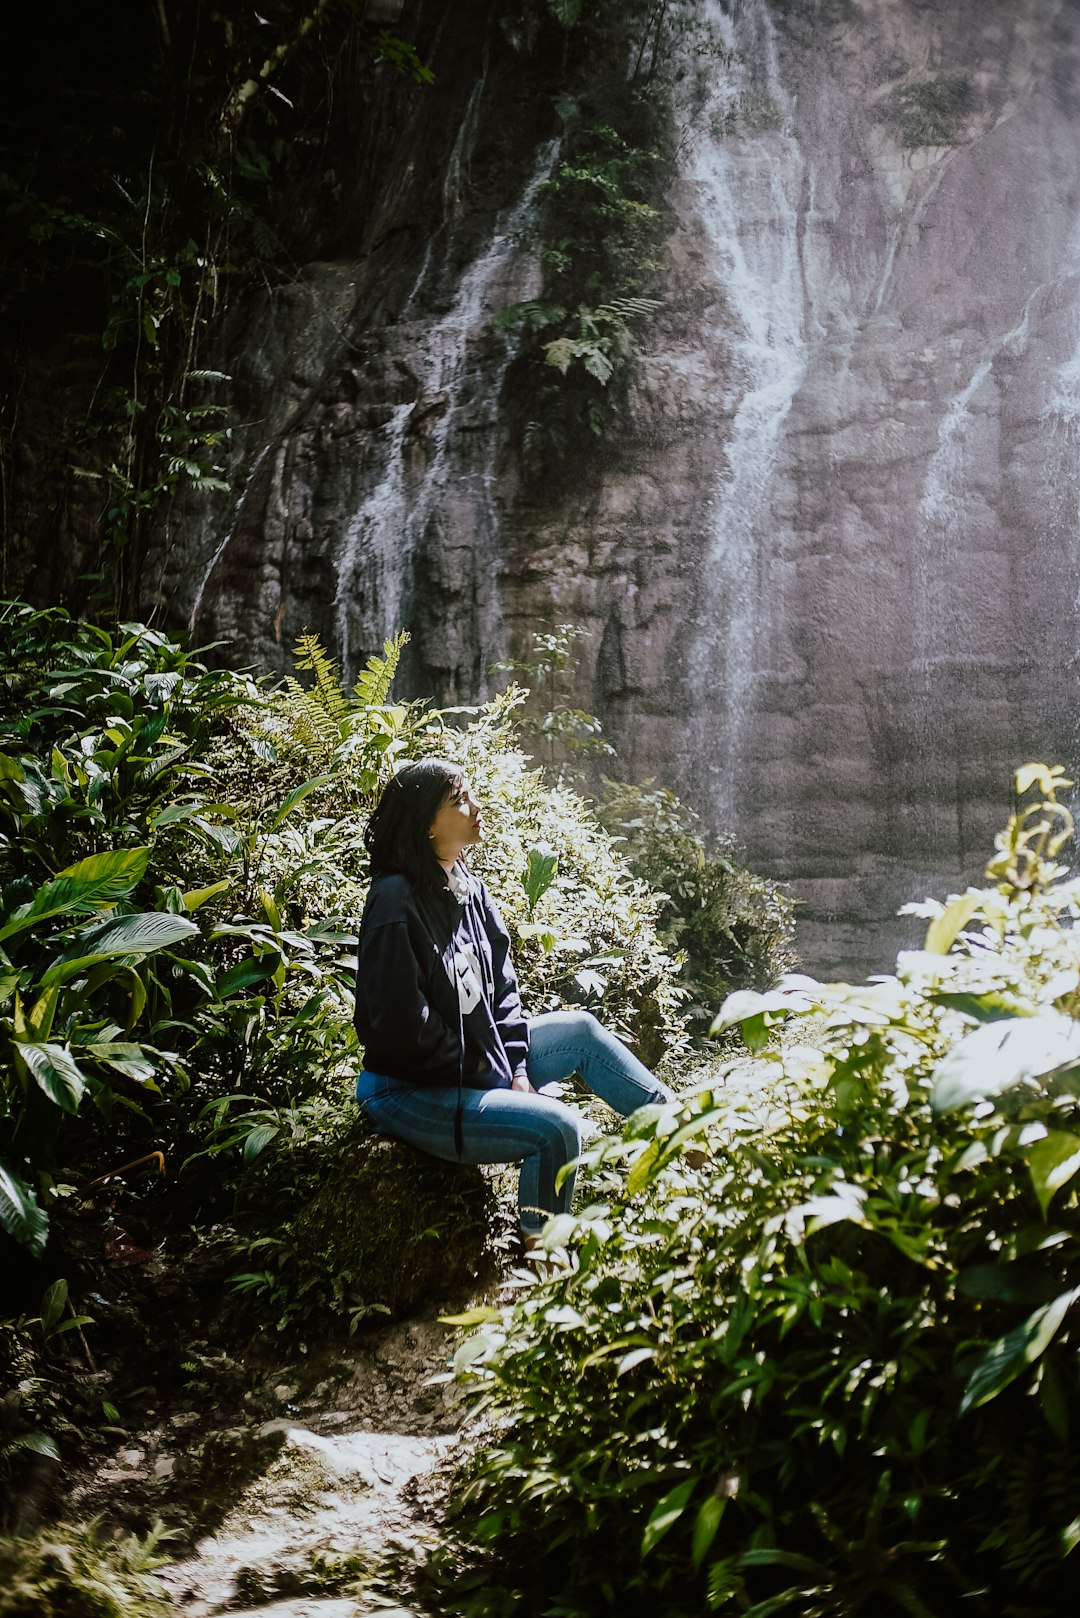 travelers stories about Waterfall in Warsa, Indonesia